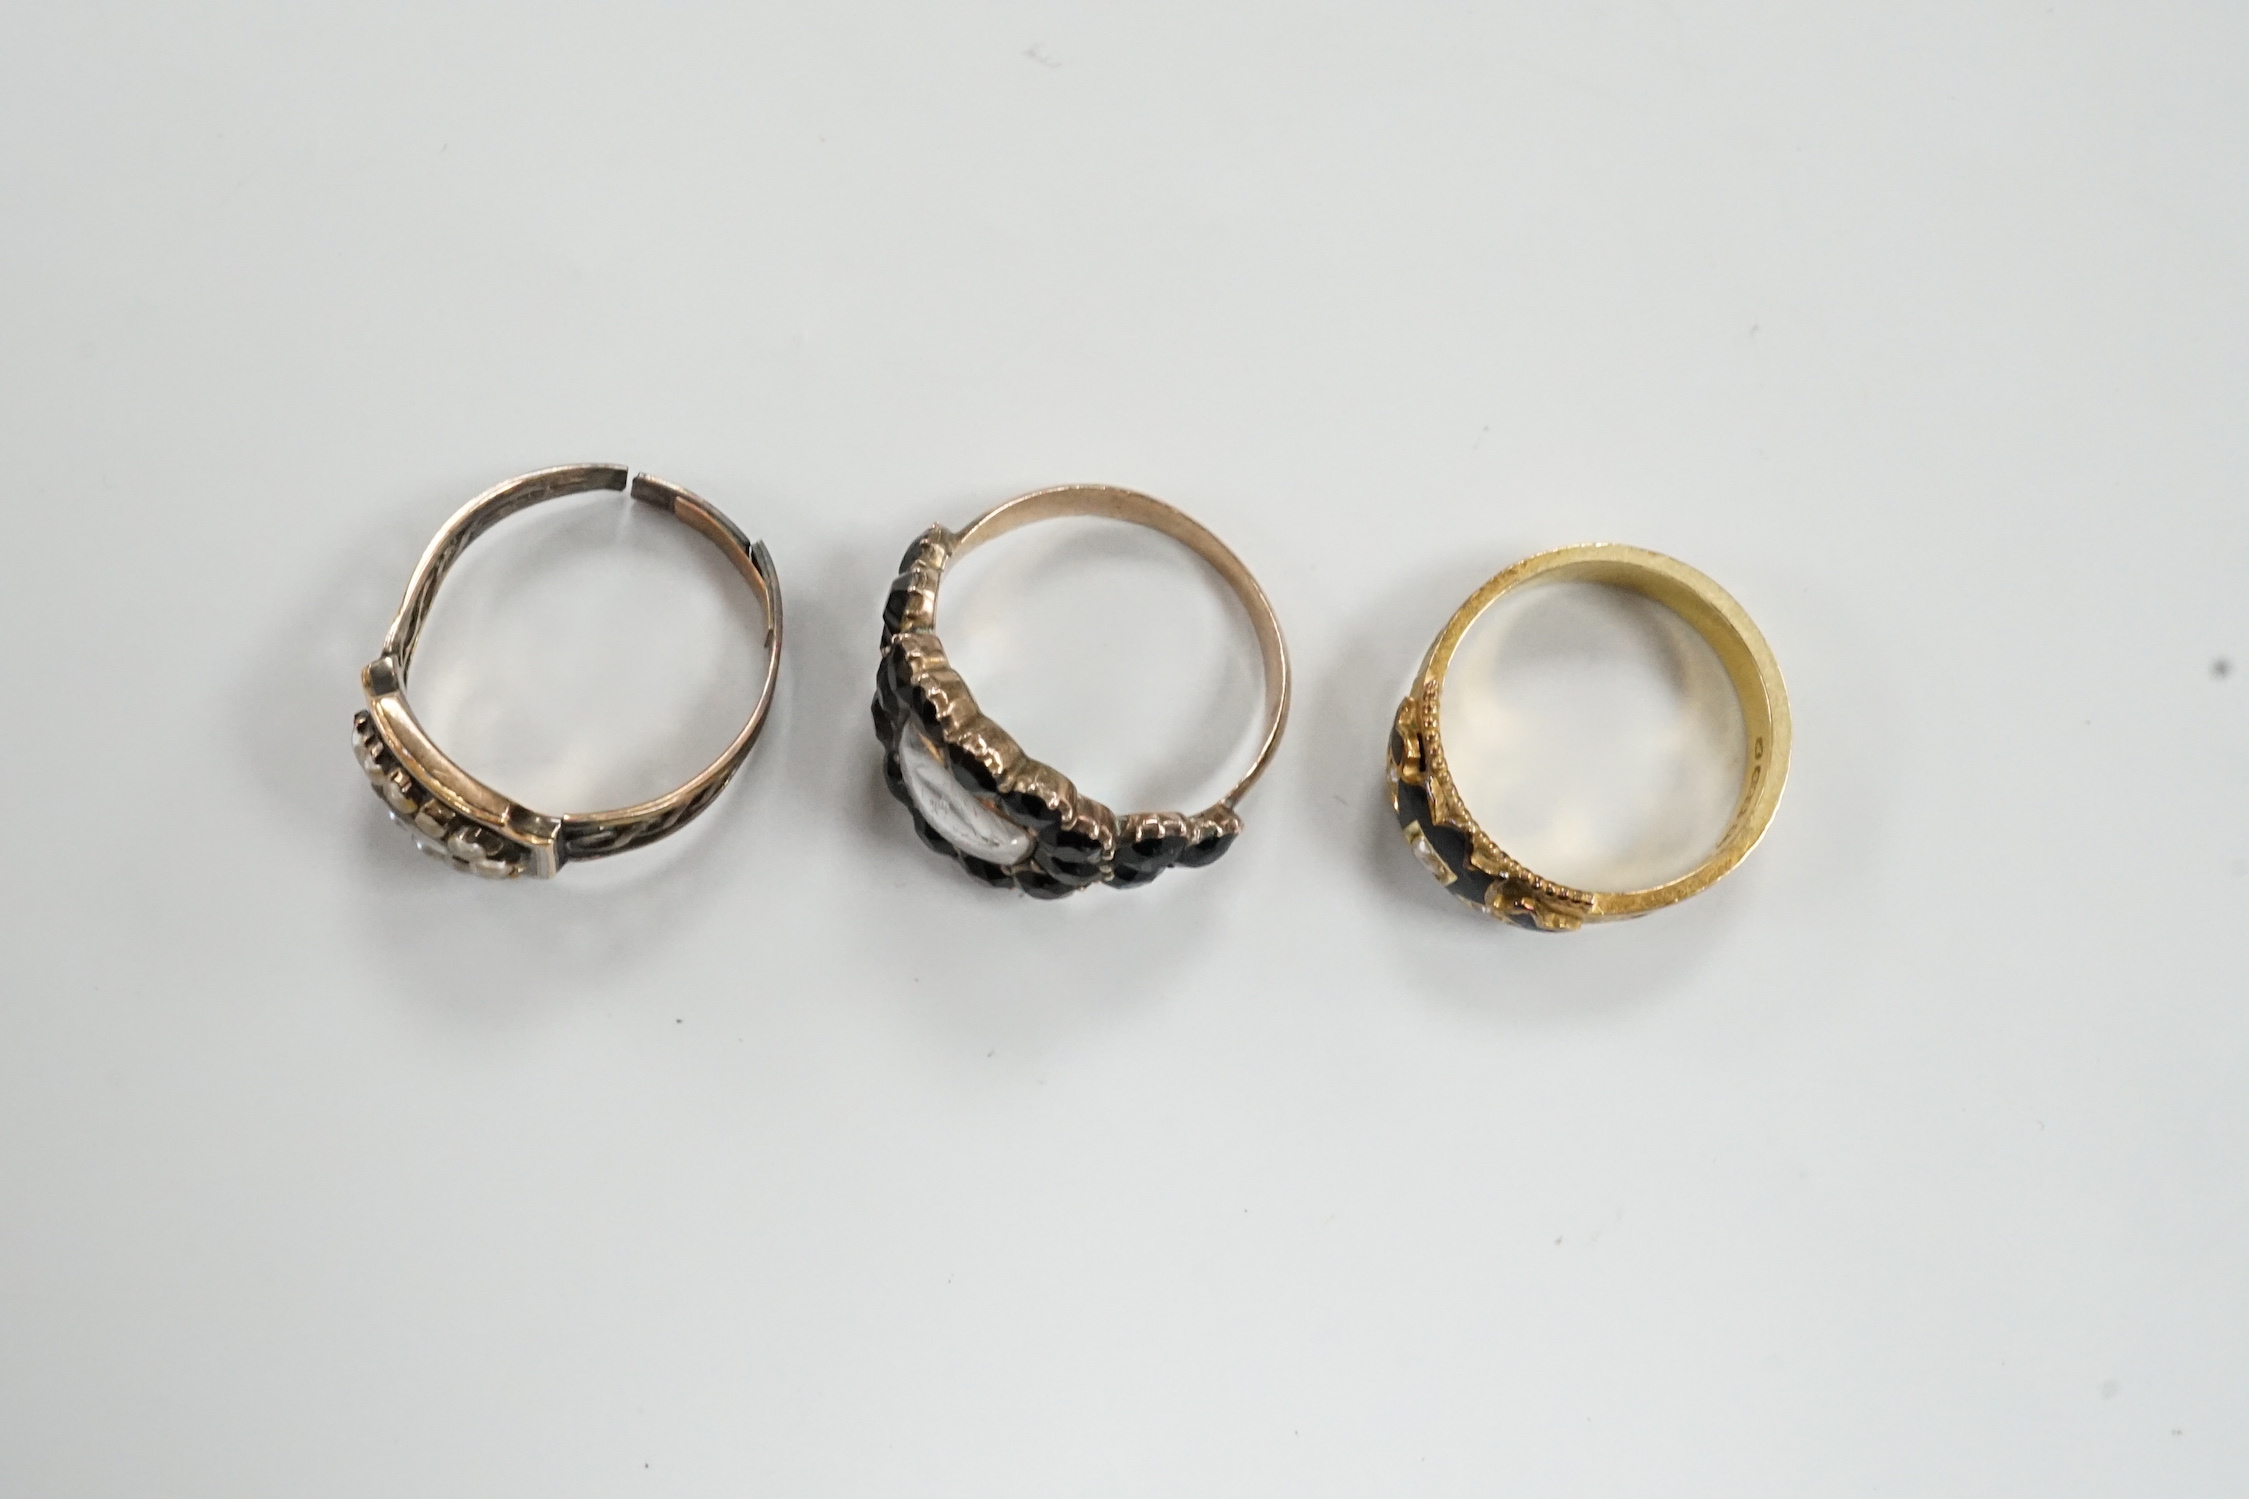 Three assorted Georgian mourning rings, including a 15ct gold, seed pearl and black enamel.